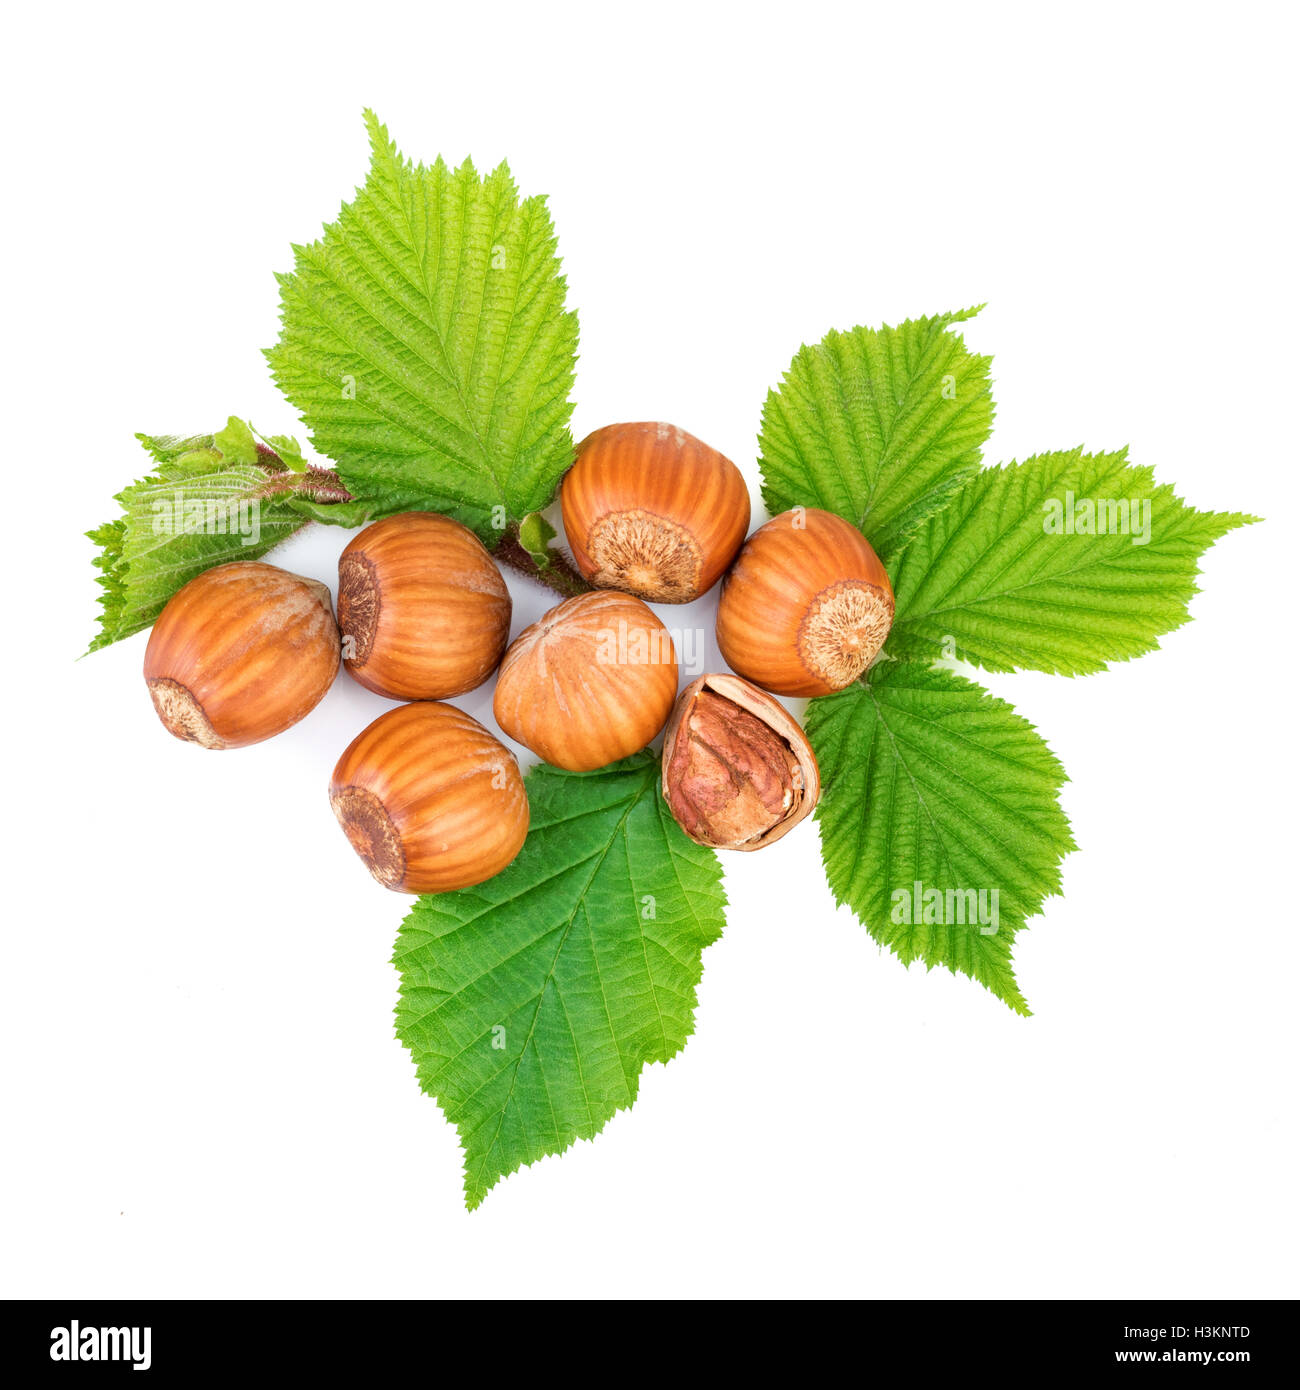 Hazelnut or filbert nuts with leaves on white. Top view. Stock Photo